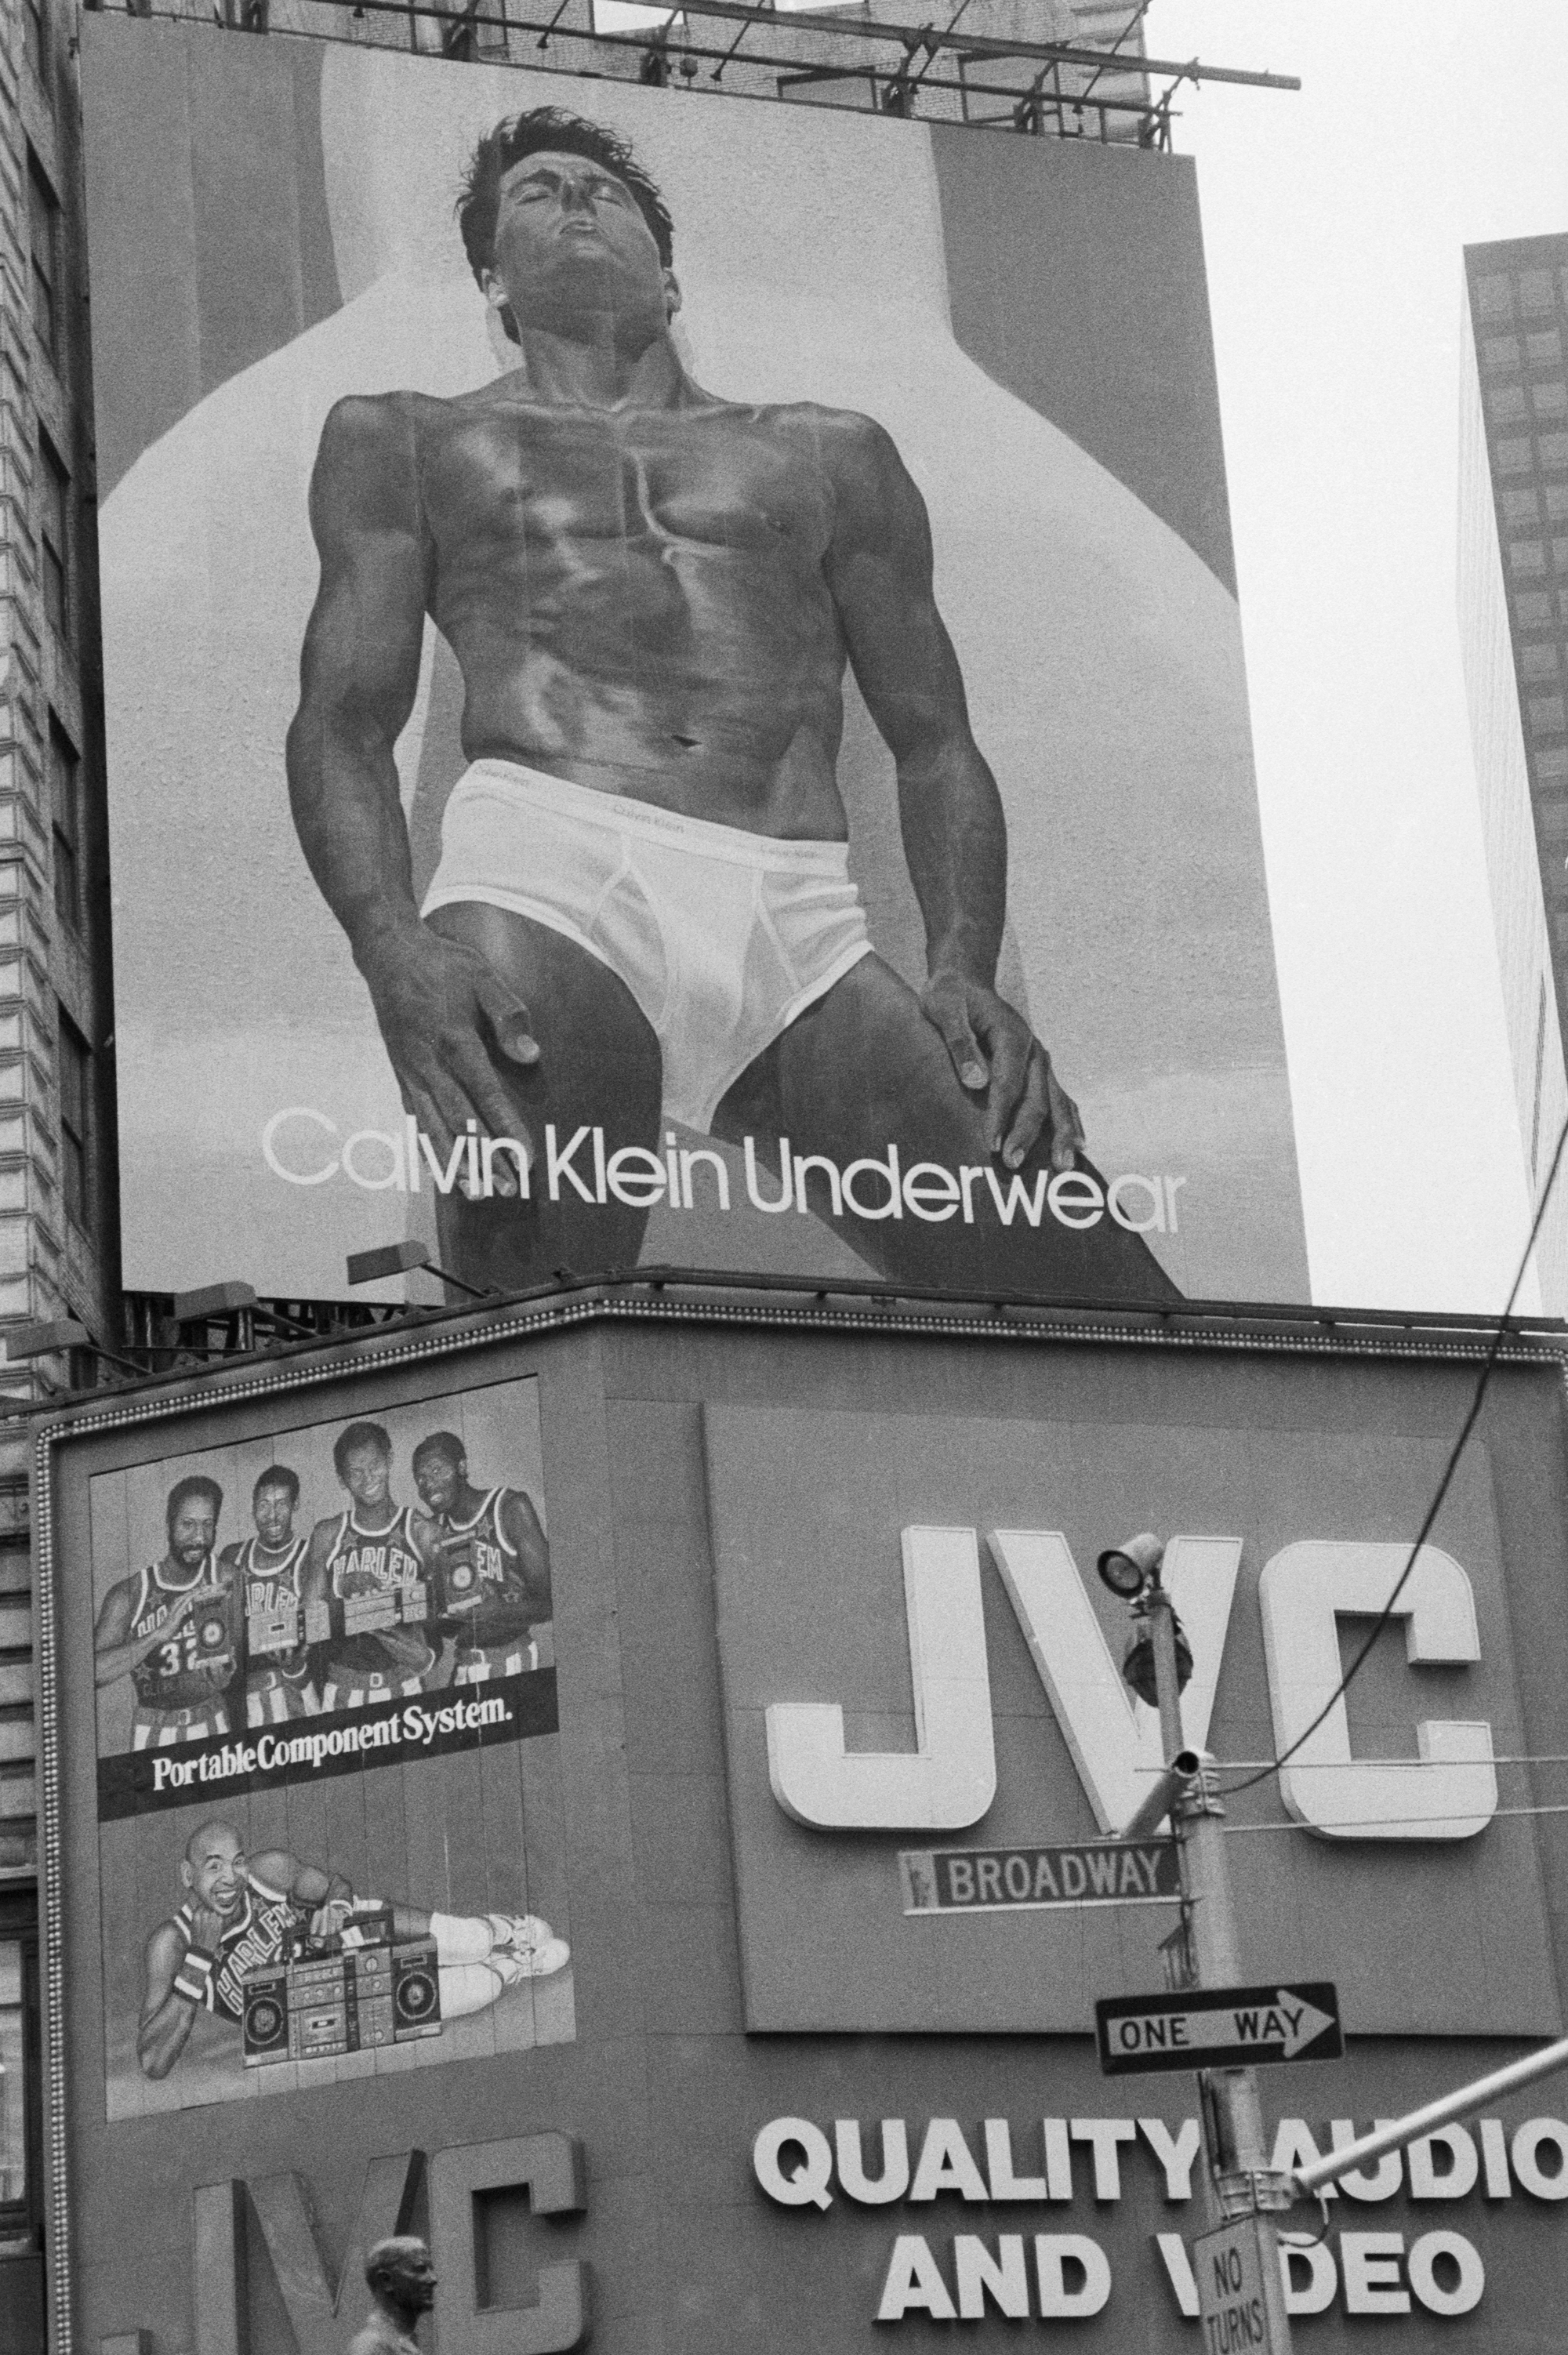 It's just pants: ads for skimpy men's underwear too racy for media